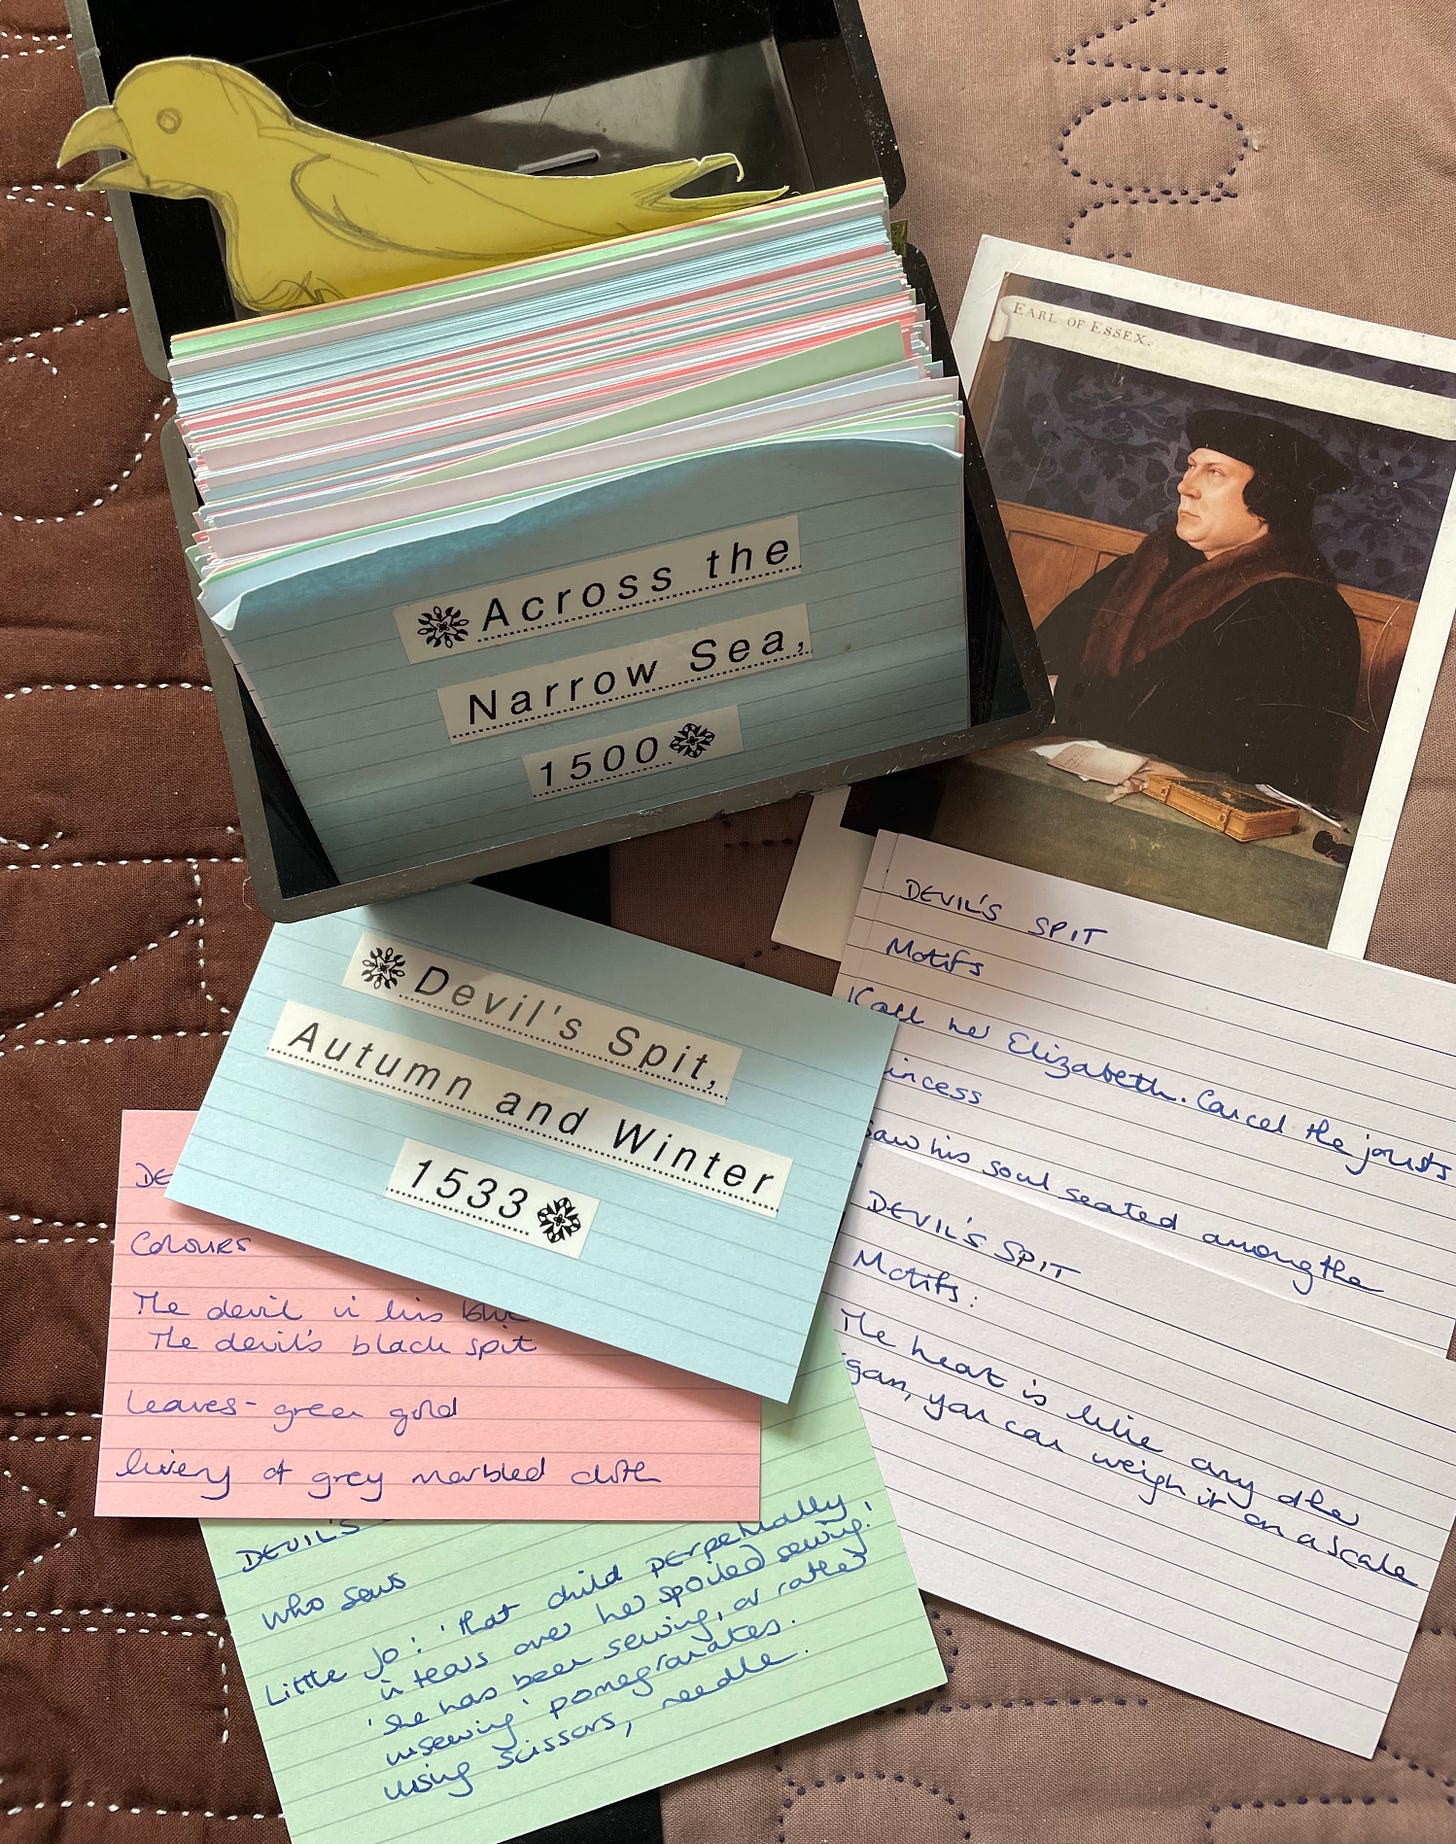 A box of index cards, a postcard of Thomas Cromwell, cards that read “Devil’s Spit, Autumm and Winter 1533 with handwritten cards of motifs and colours